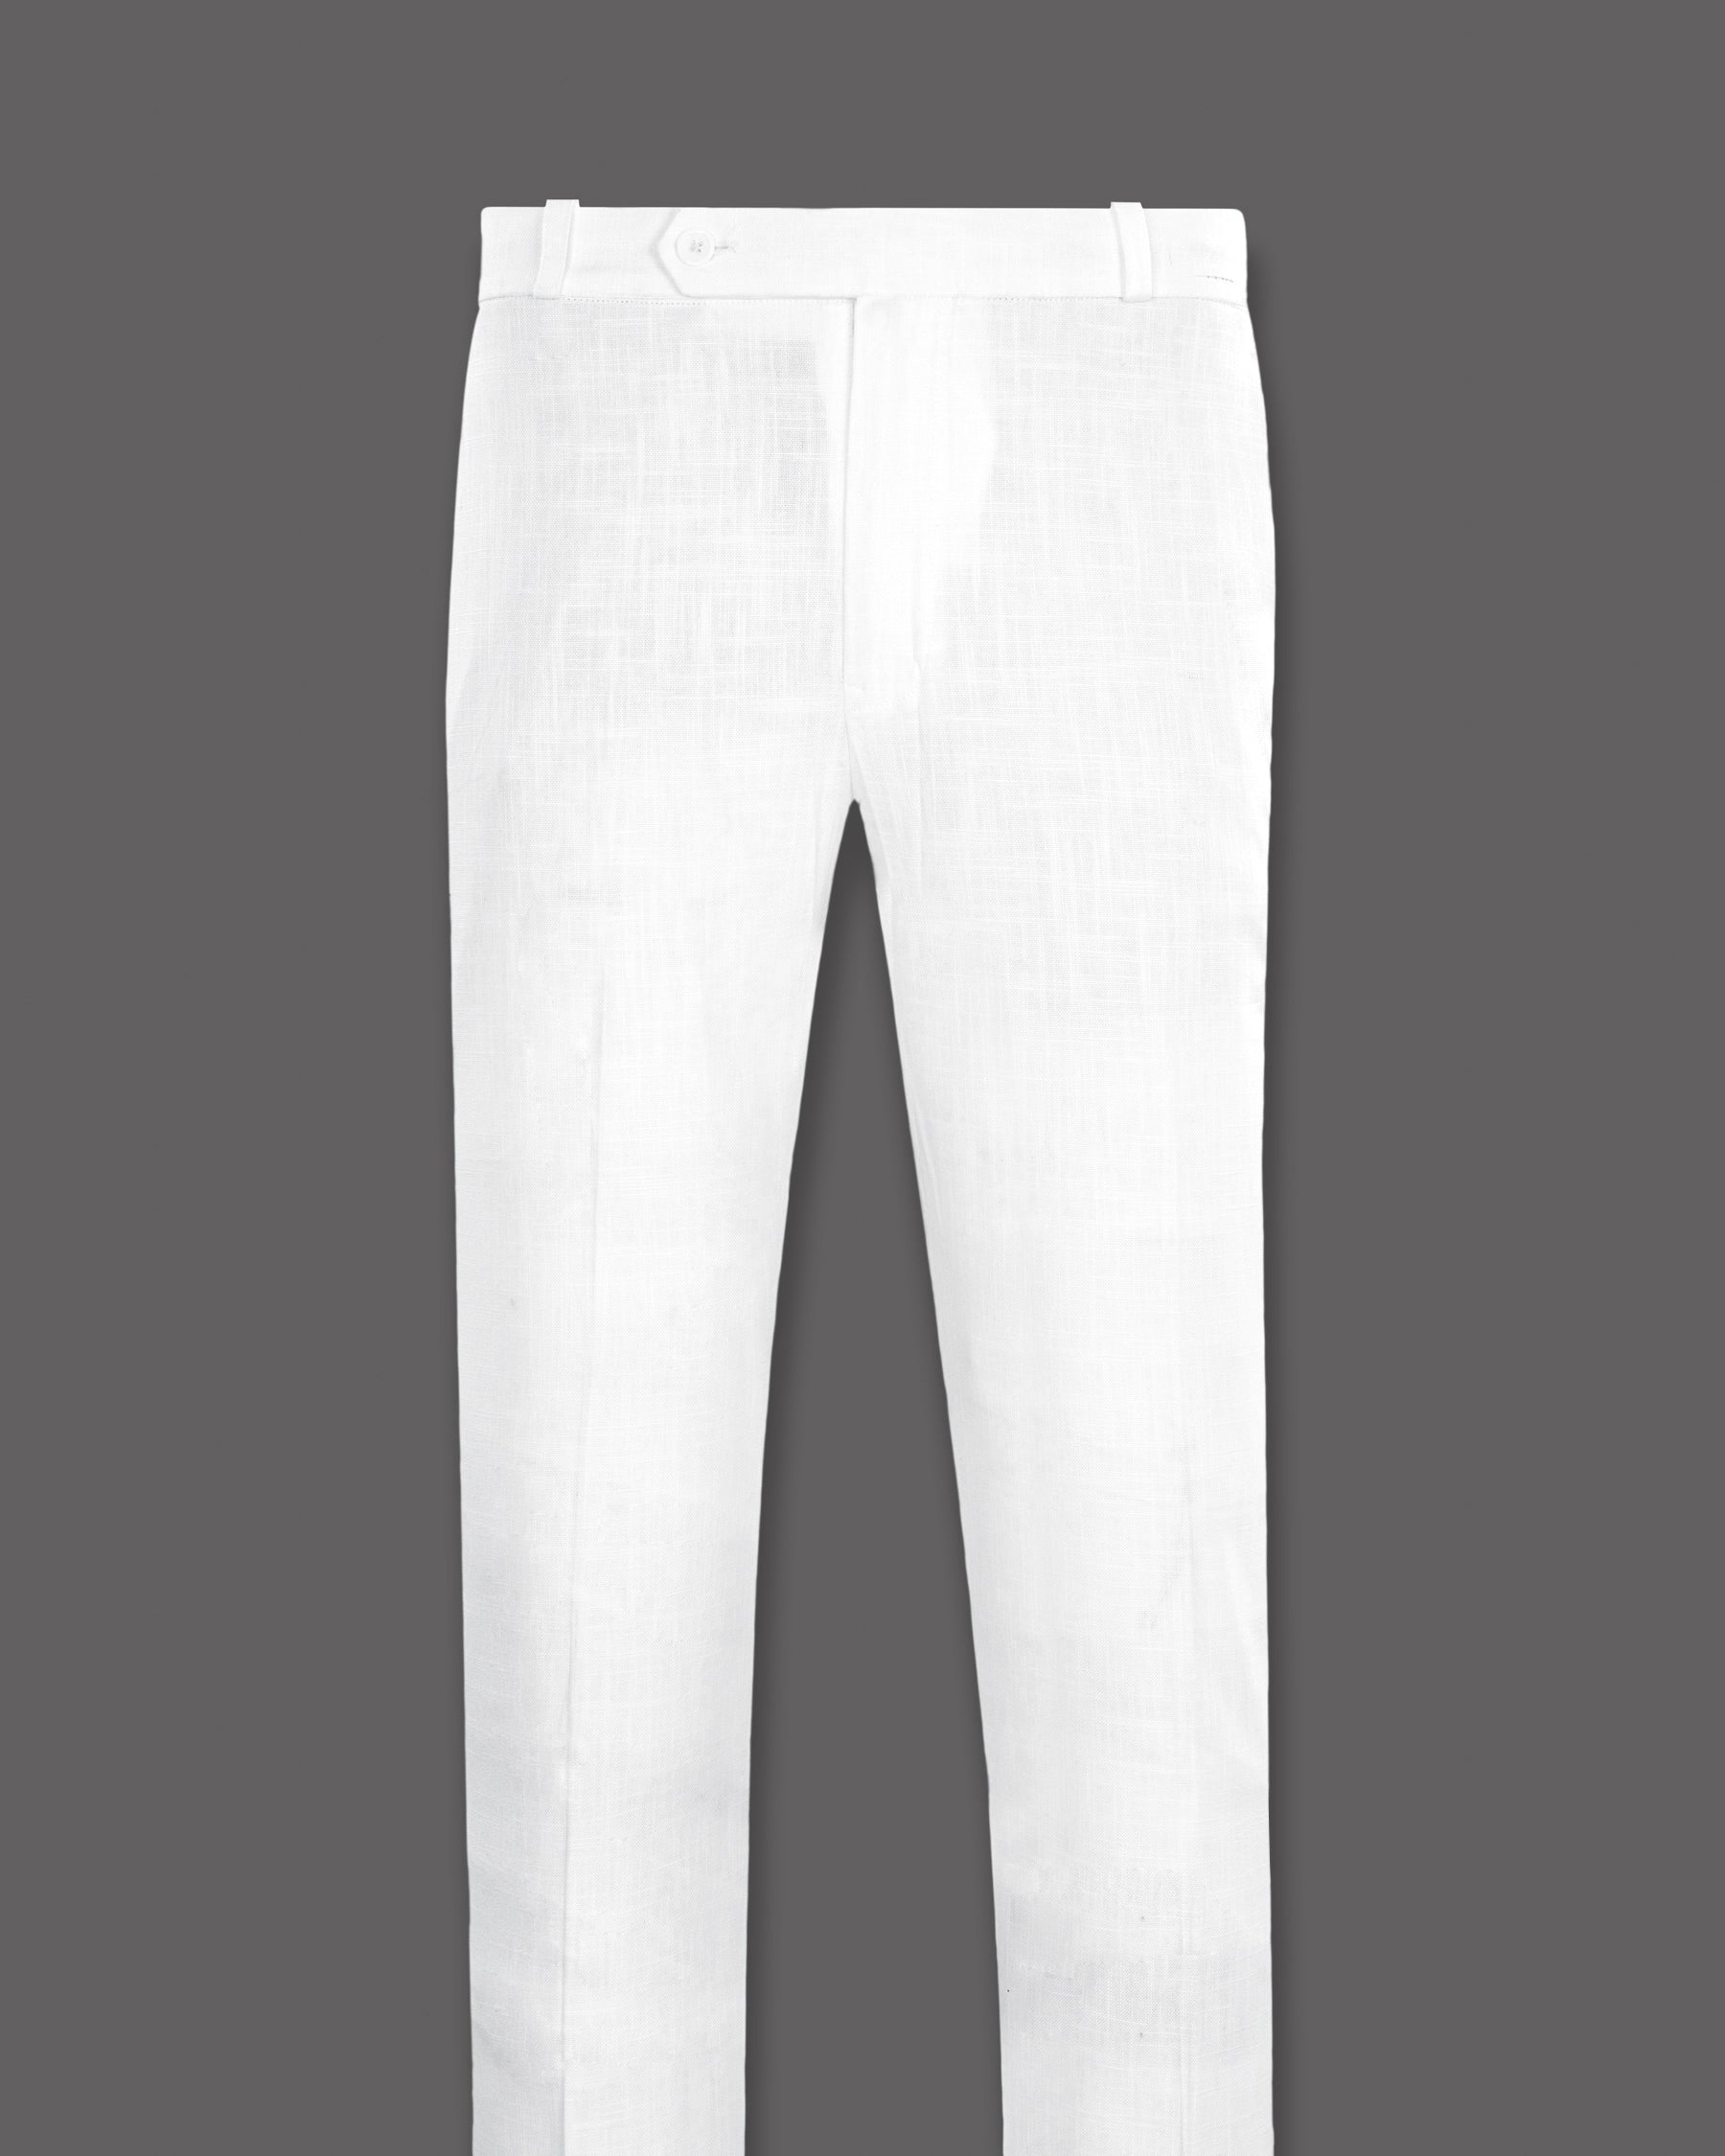 BRIGHT WHITE LUXURIOUS LINEN DOUSTE BREASTED PERFORMANCE Suit ST1239-DB-36, ST1239-DB-38, ST1239-DB-40, ST1239-DB-60, ST1239-DB-42, ST1239-DB-44, ST1239-DB-46, ST1239-DB-48, ST1239-DB-58, ST1239-DB-56, ST1239-DB-50, ST1239-DB-52, ST1239-DB-54